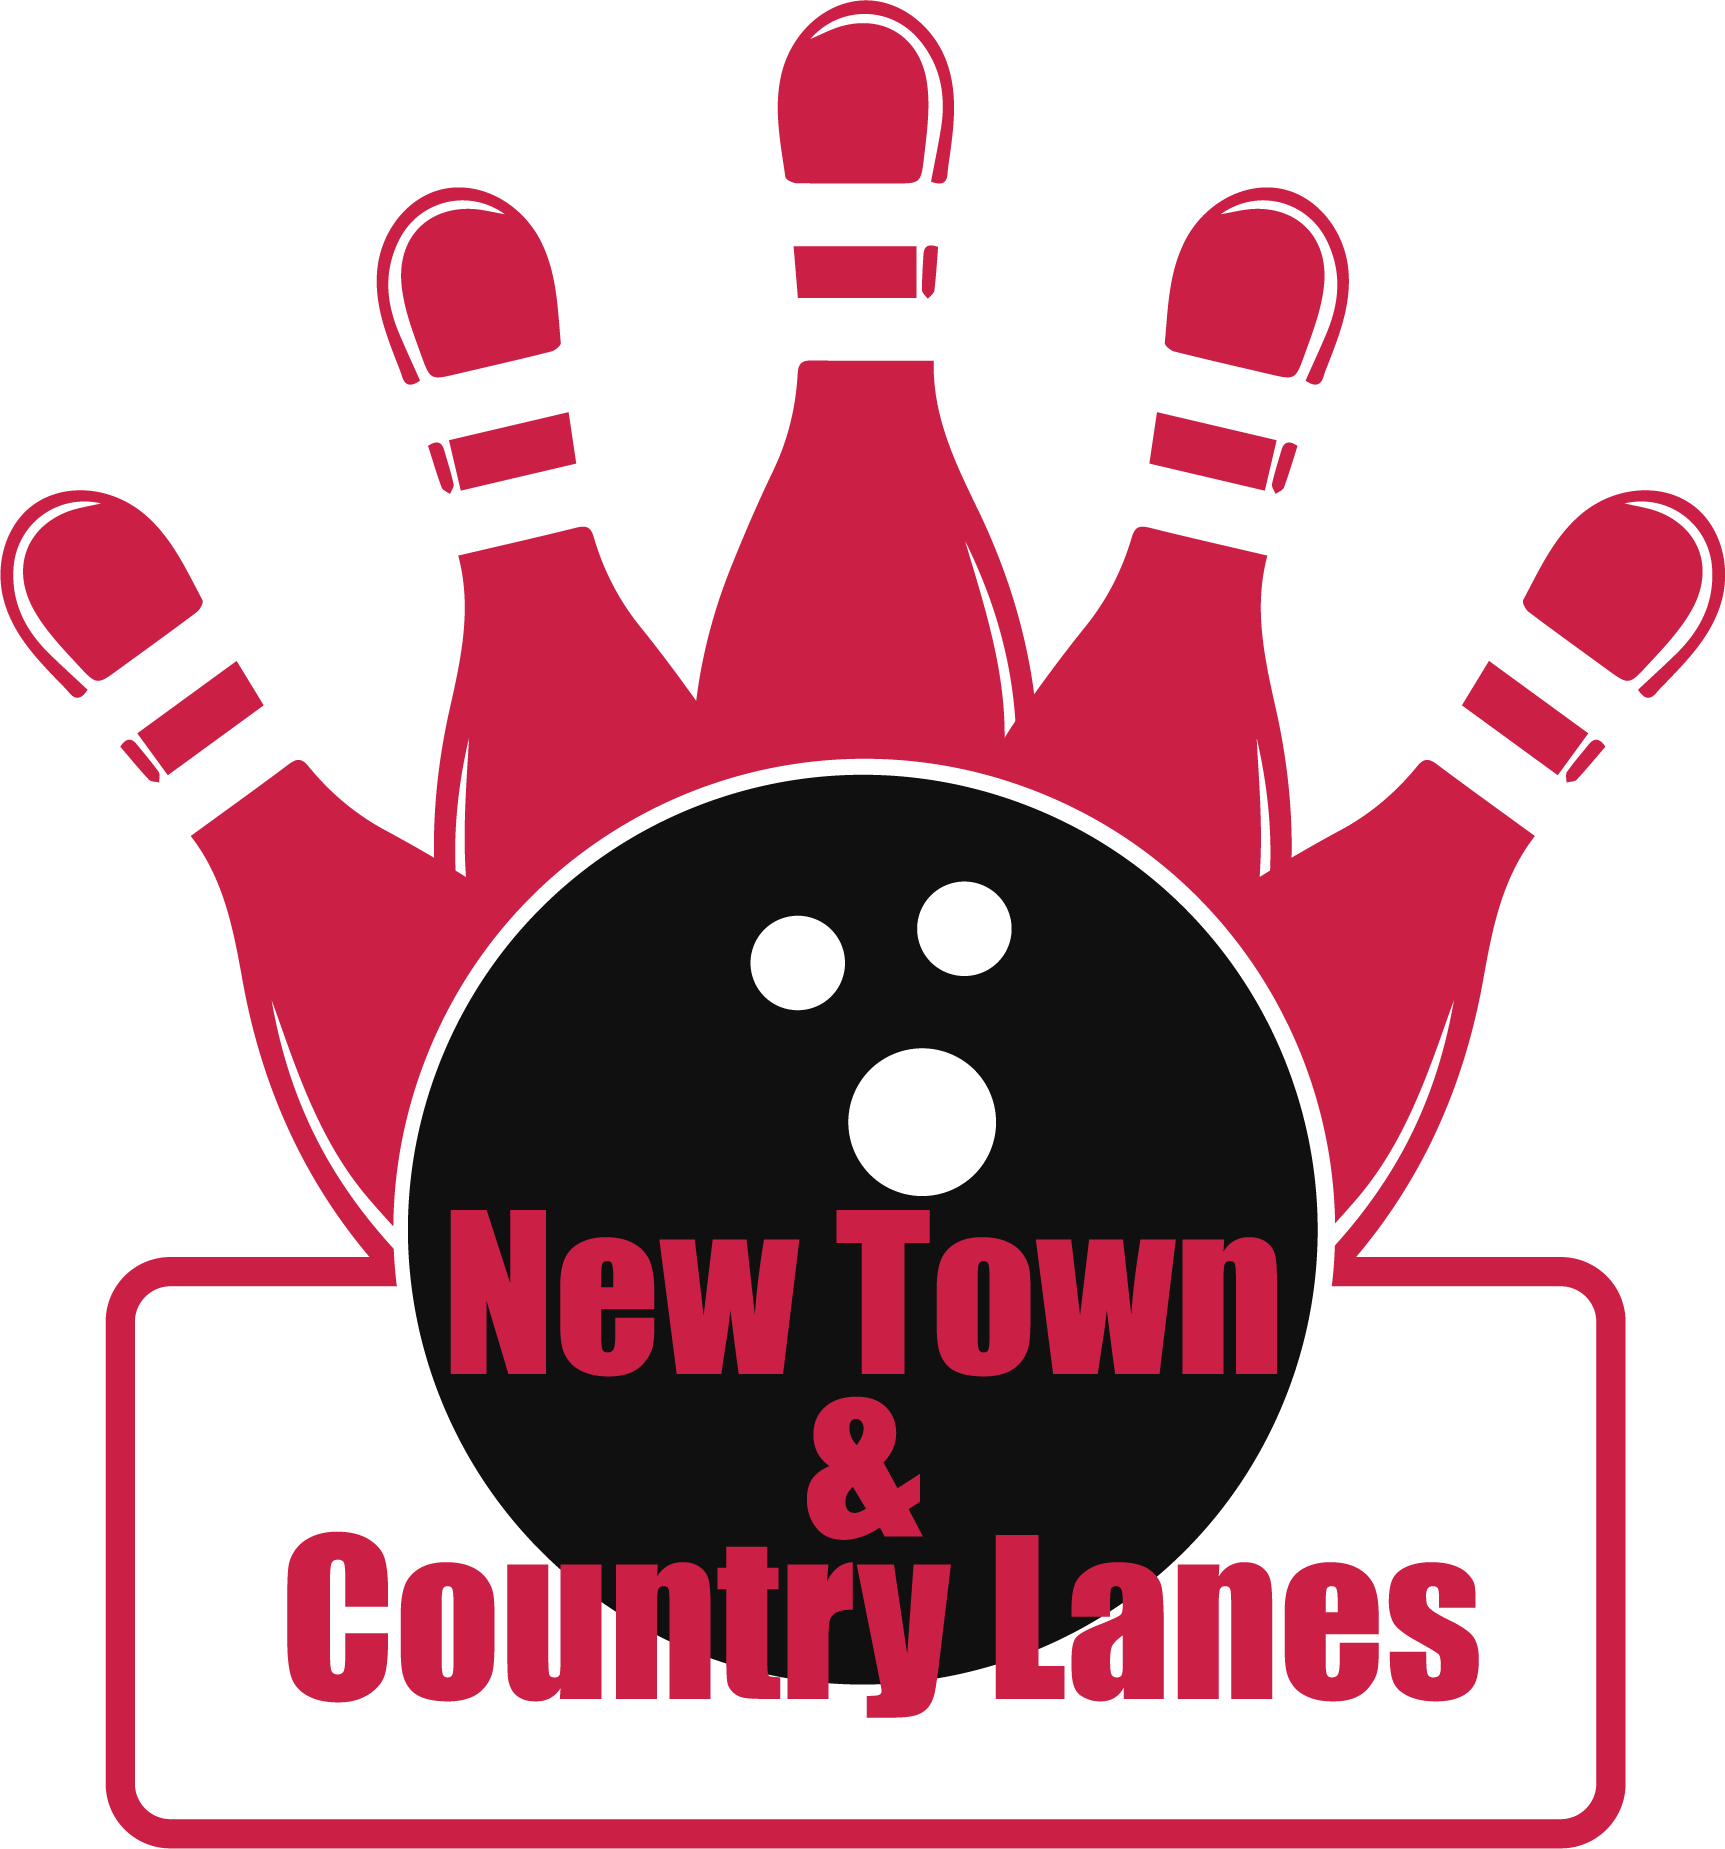 Town & Country Lanes